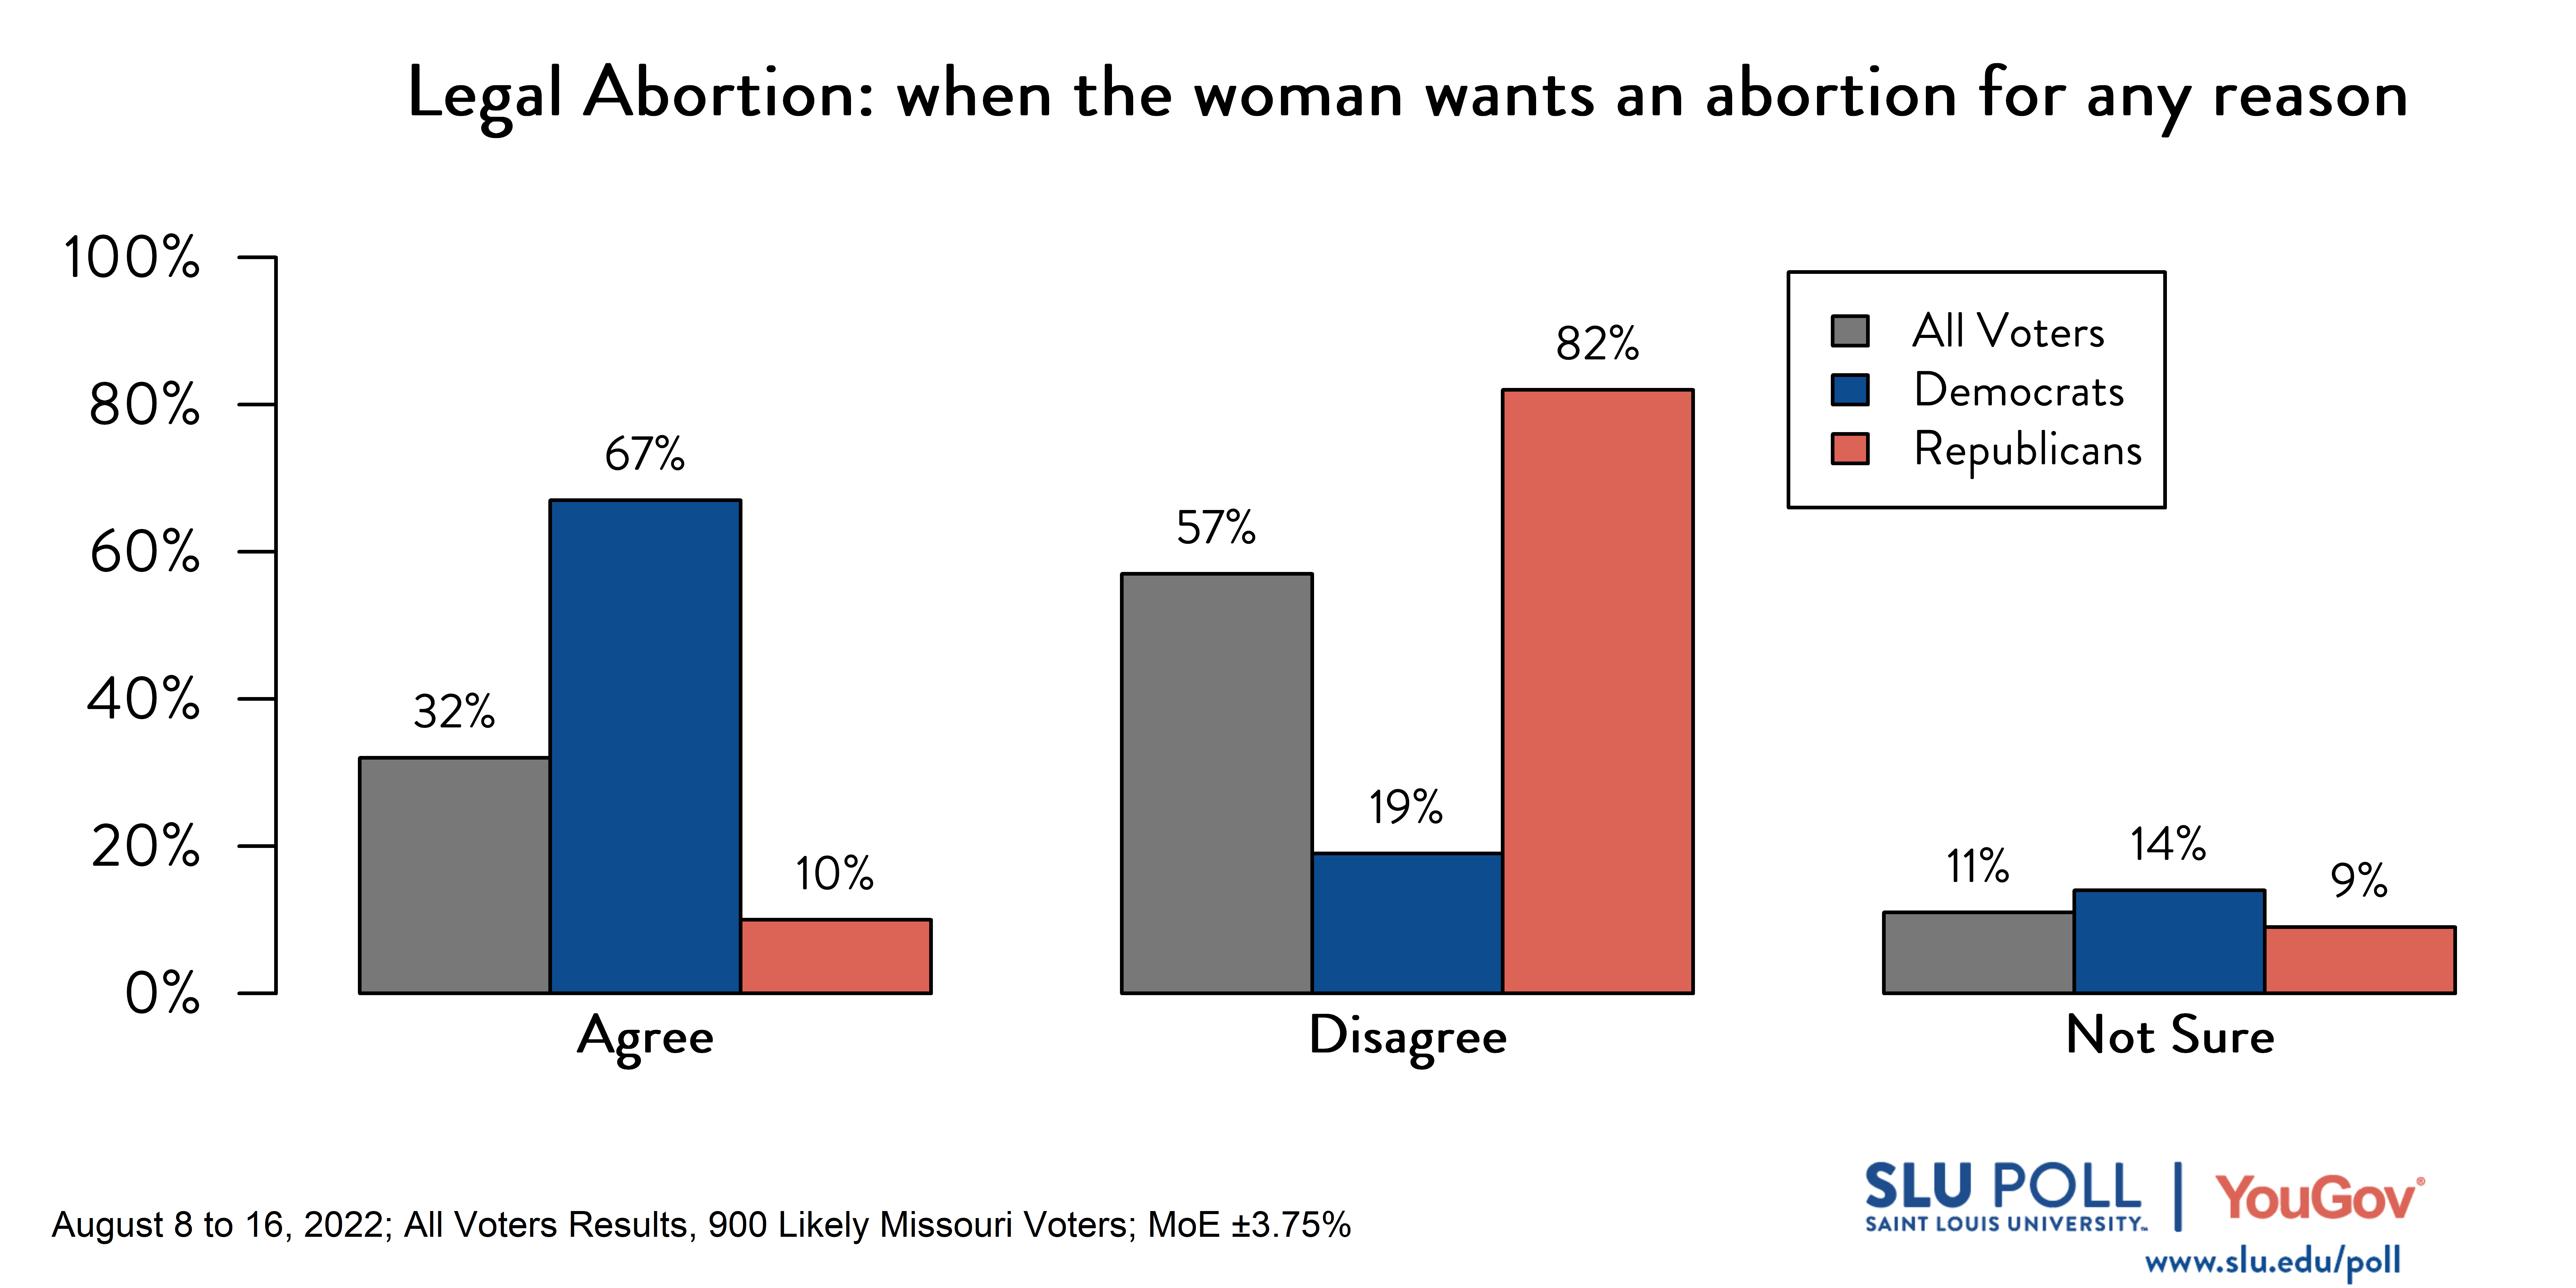 Likely voters' responses to 'Do you think it should be possible for a woman to legally obtain an abortion in the state of Missouri: when the woman wants an abortion for any reason?': 32% Agree, 57% Disagree, and 11% Not Sure. Democratic voters' responses: ' 67% Agree, 19% Disagree, and 14% Not Sure. Republican voters' responses: 10% Agree, 82% Disagree, and 9% Not Sure. 